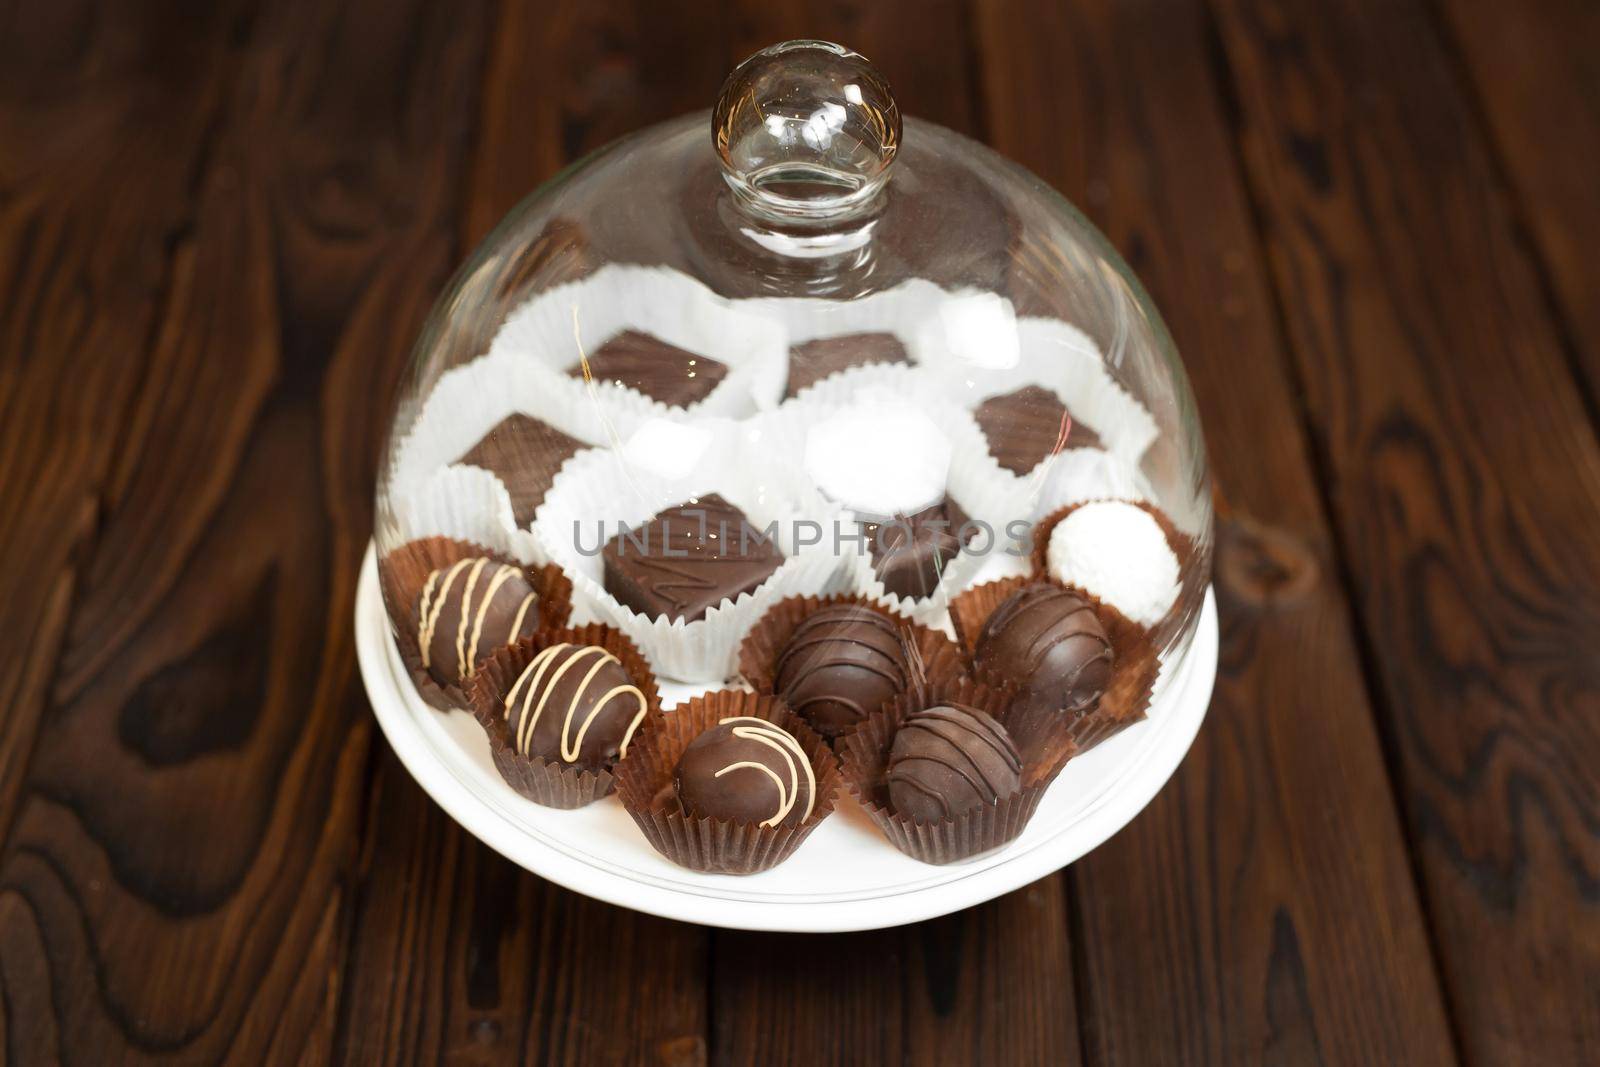 Handmade chocolates on a tray under a glass cover by StudioPeace